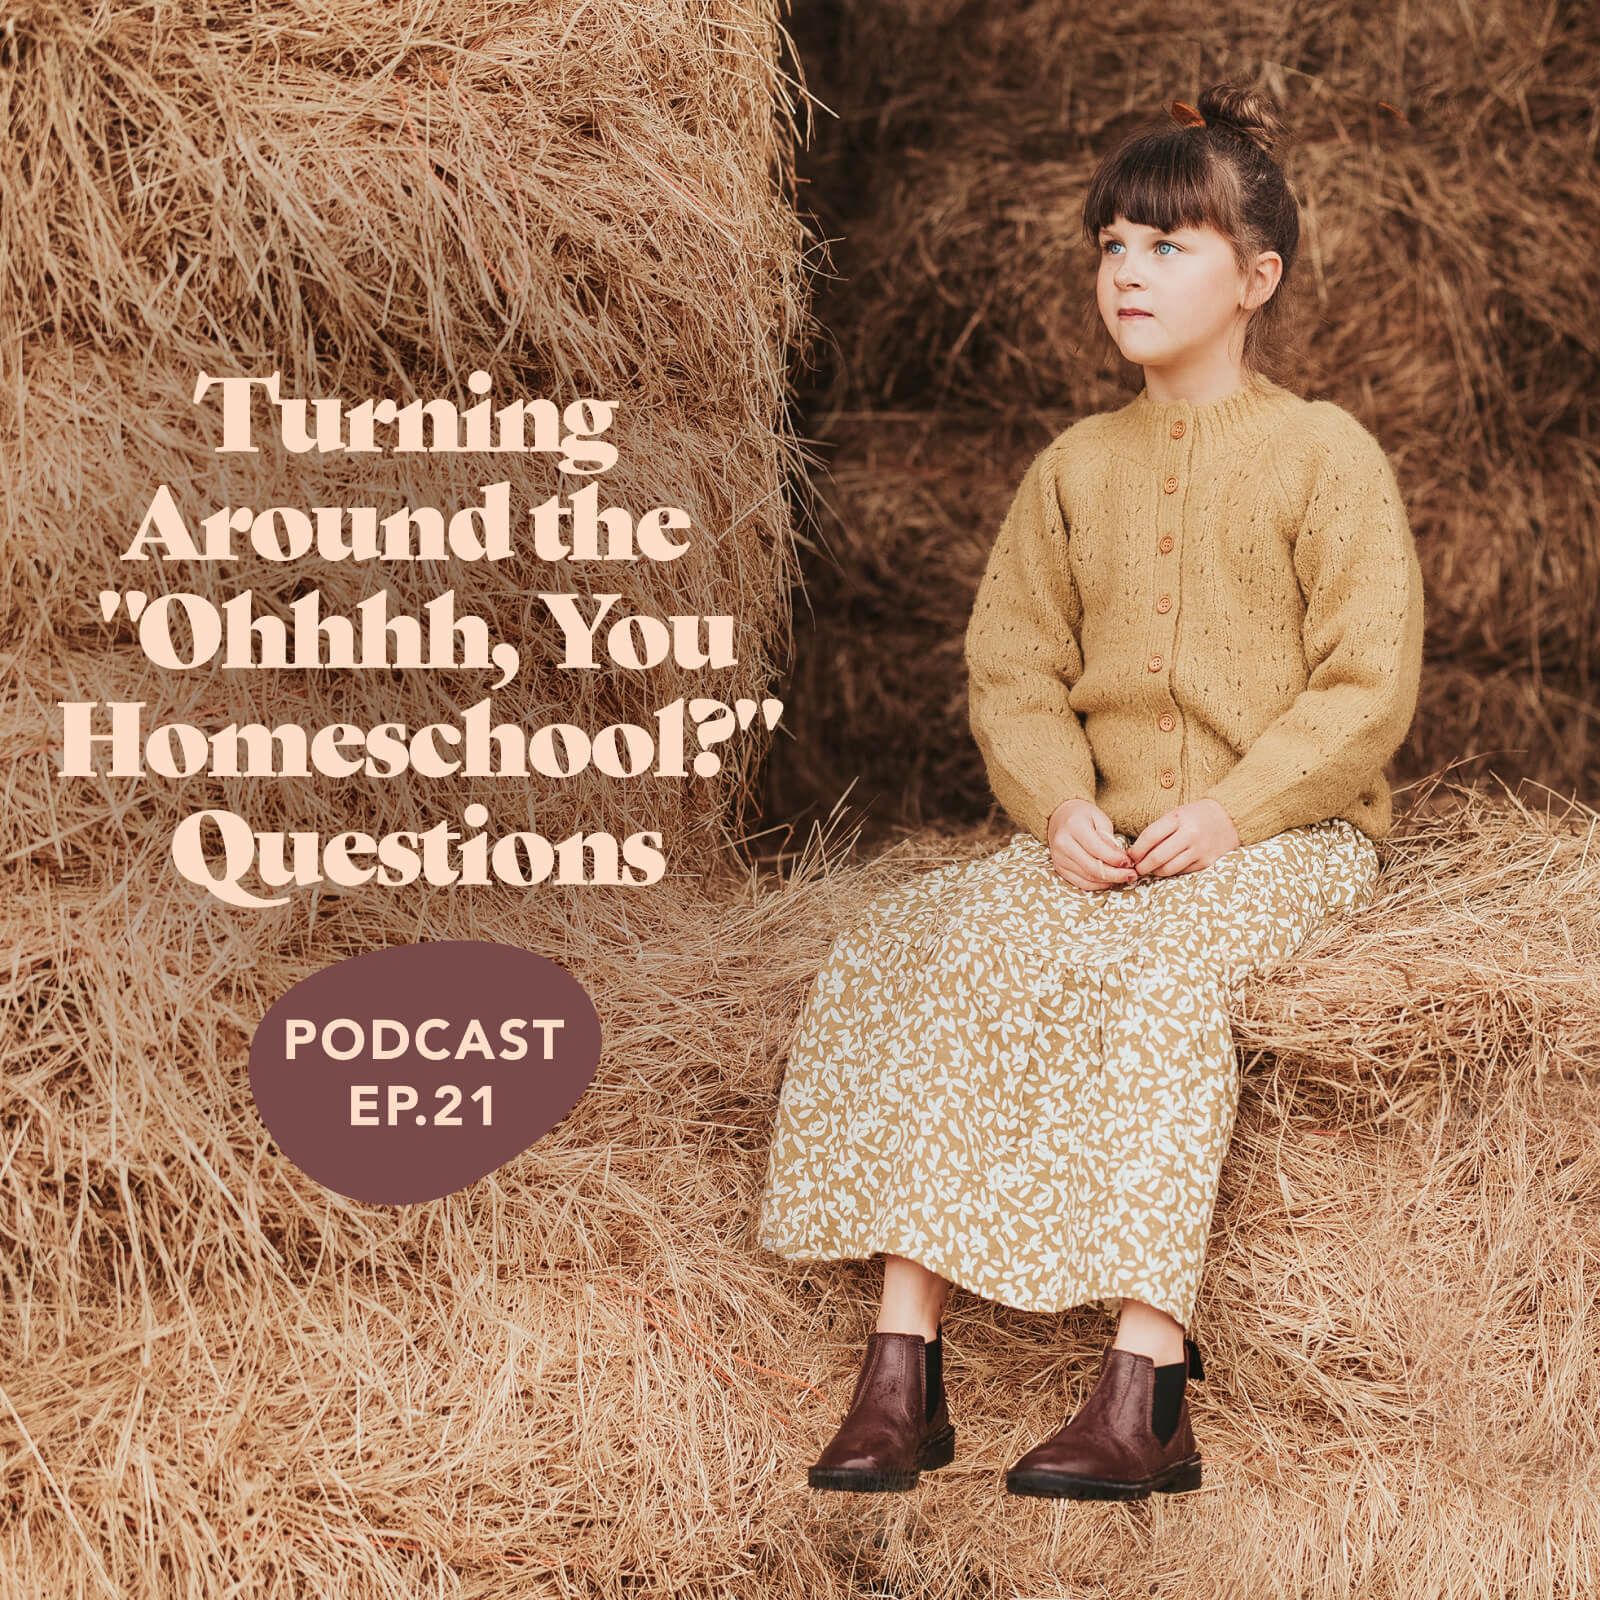 Episode 21: Turning Around the “Ohhhh, You Homeschool?” Questions